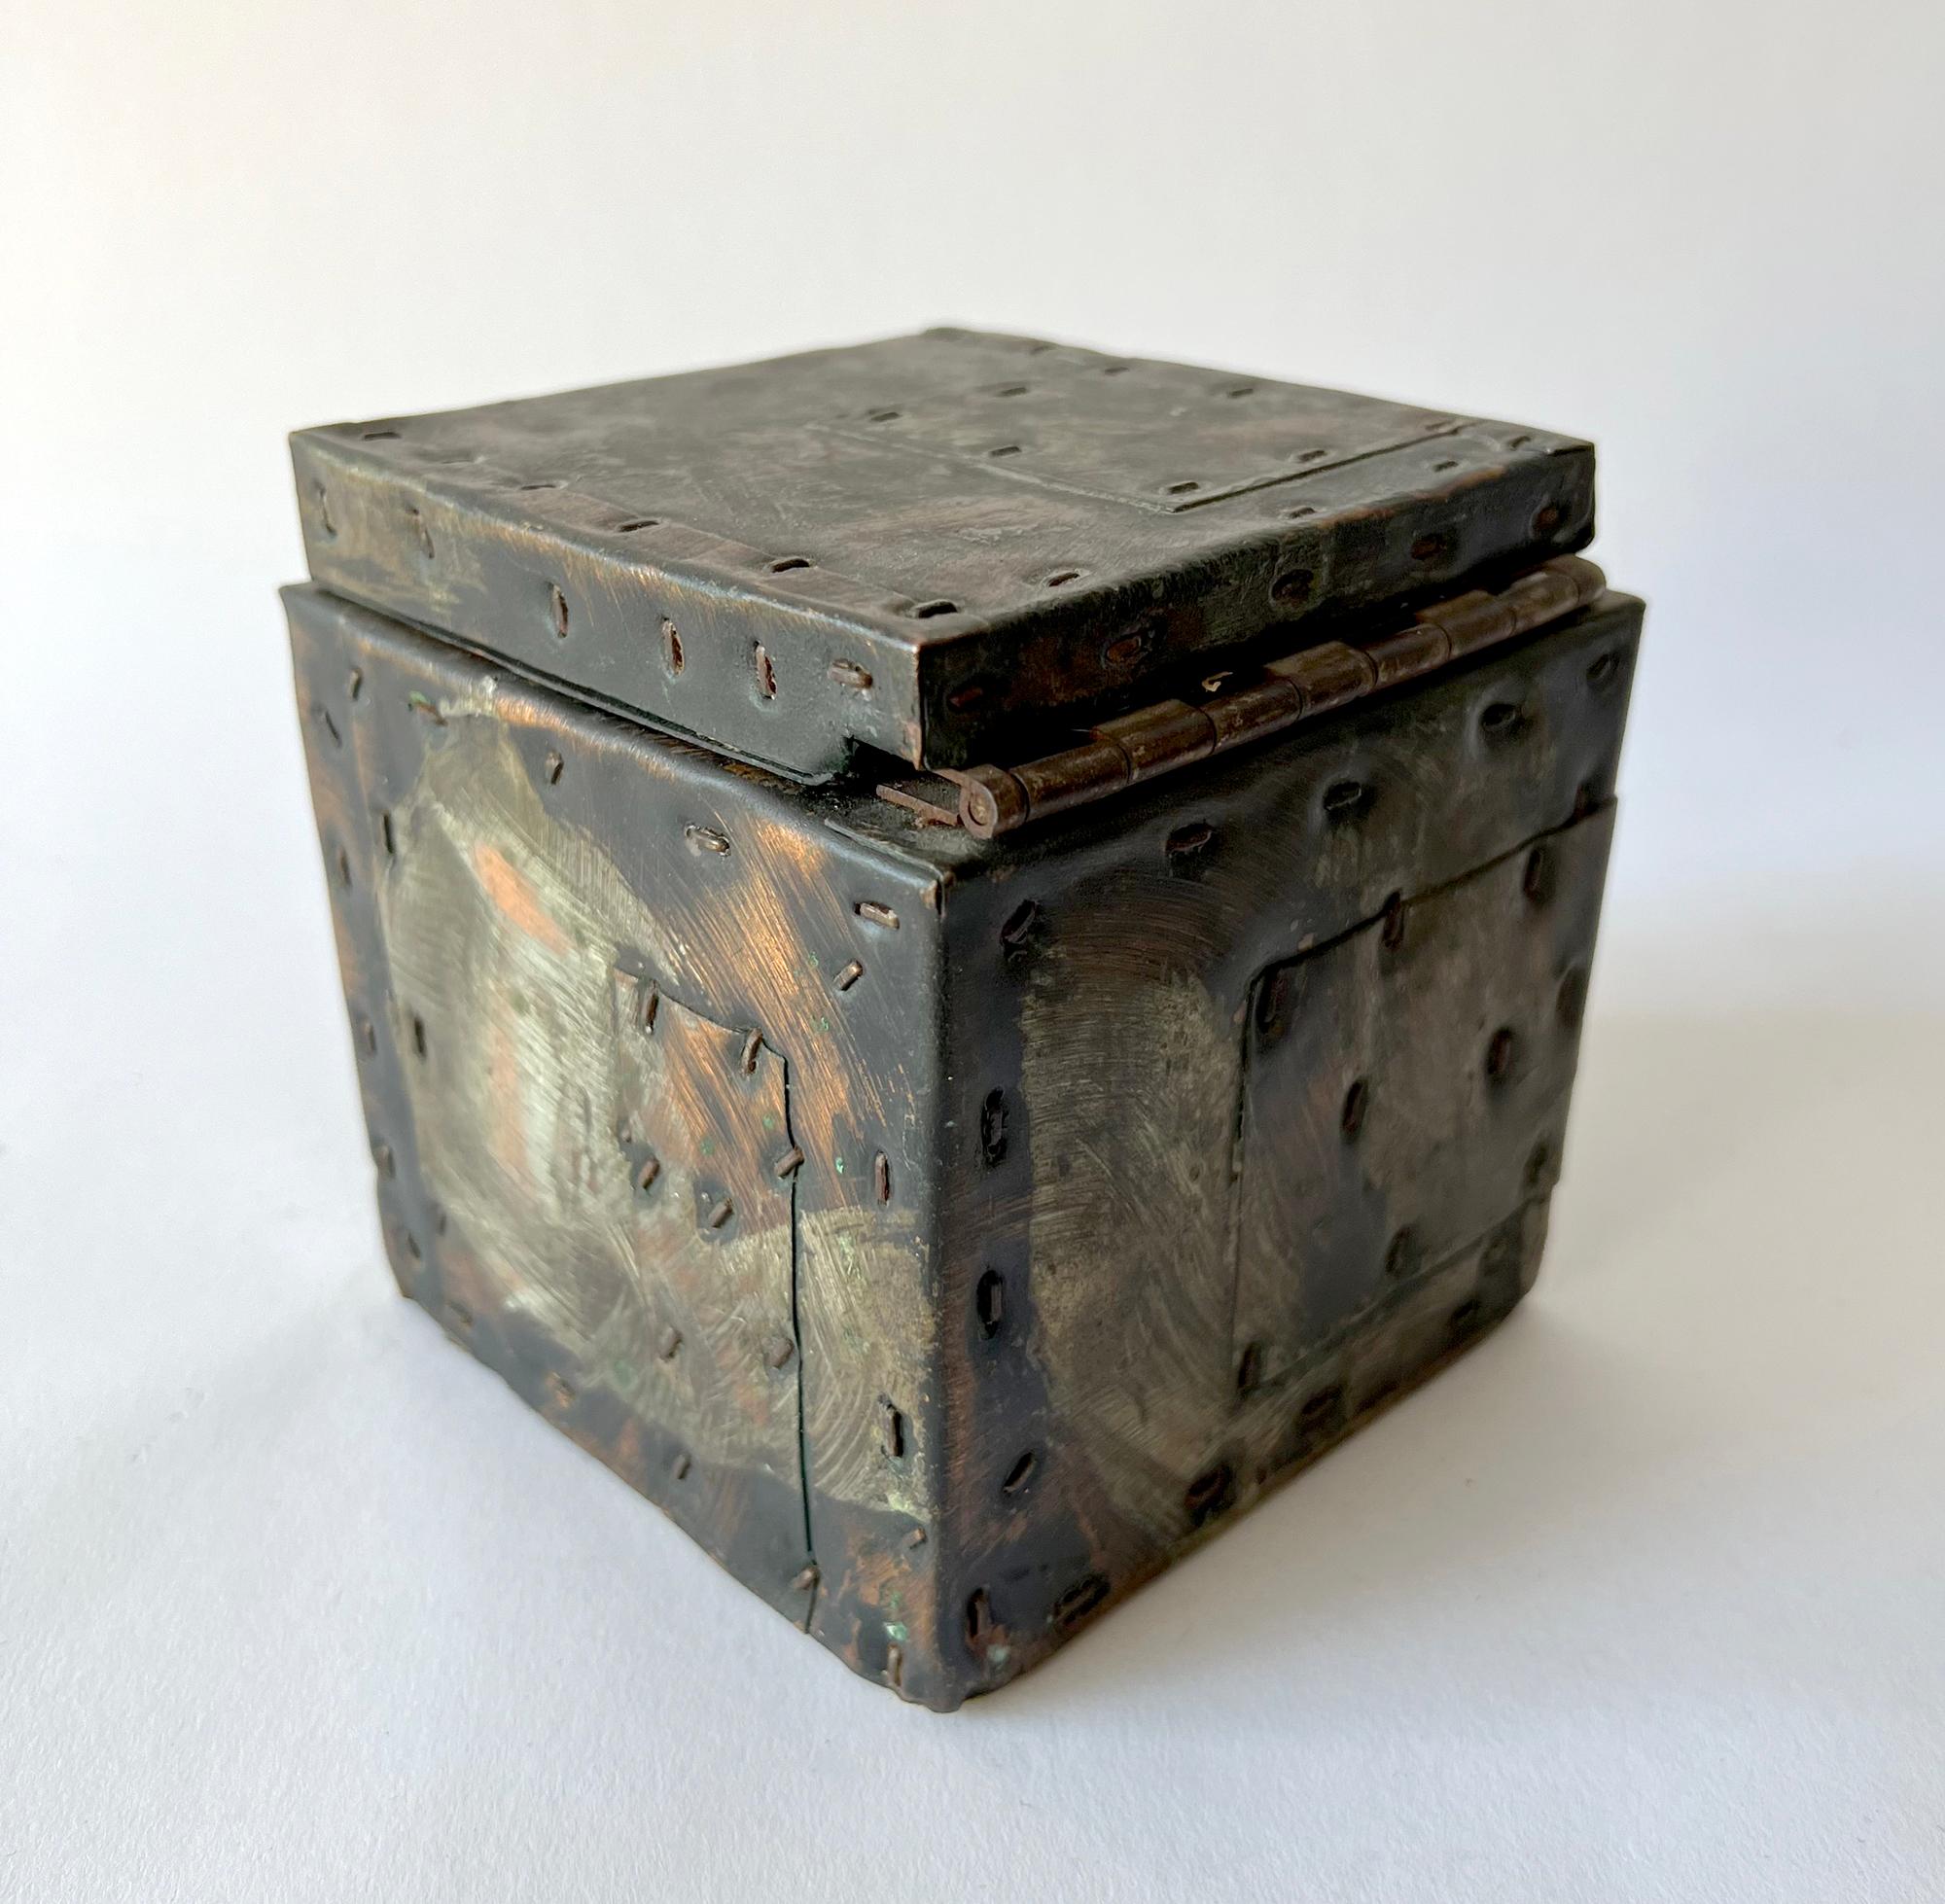 Patinated copper, steel and brass handmade cube box created by Paul Evans (1931-1987). Box measures 5